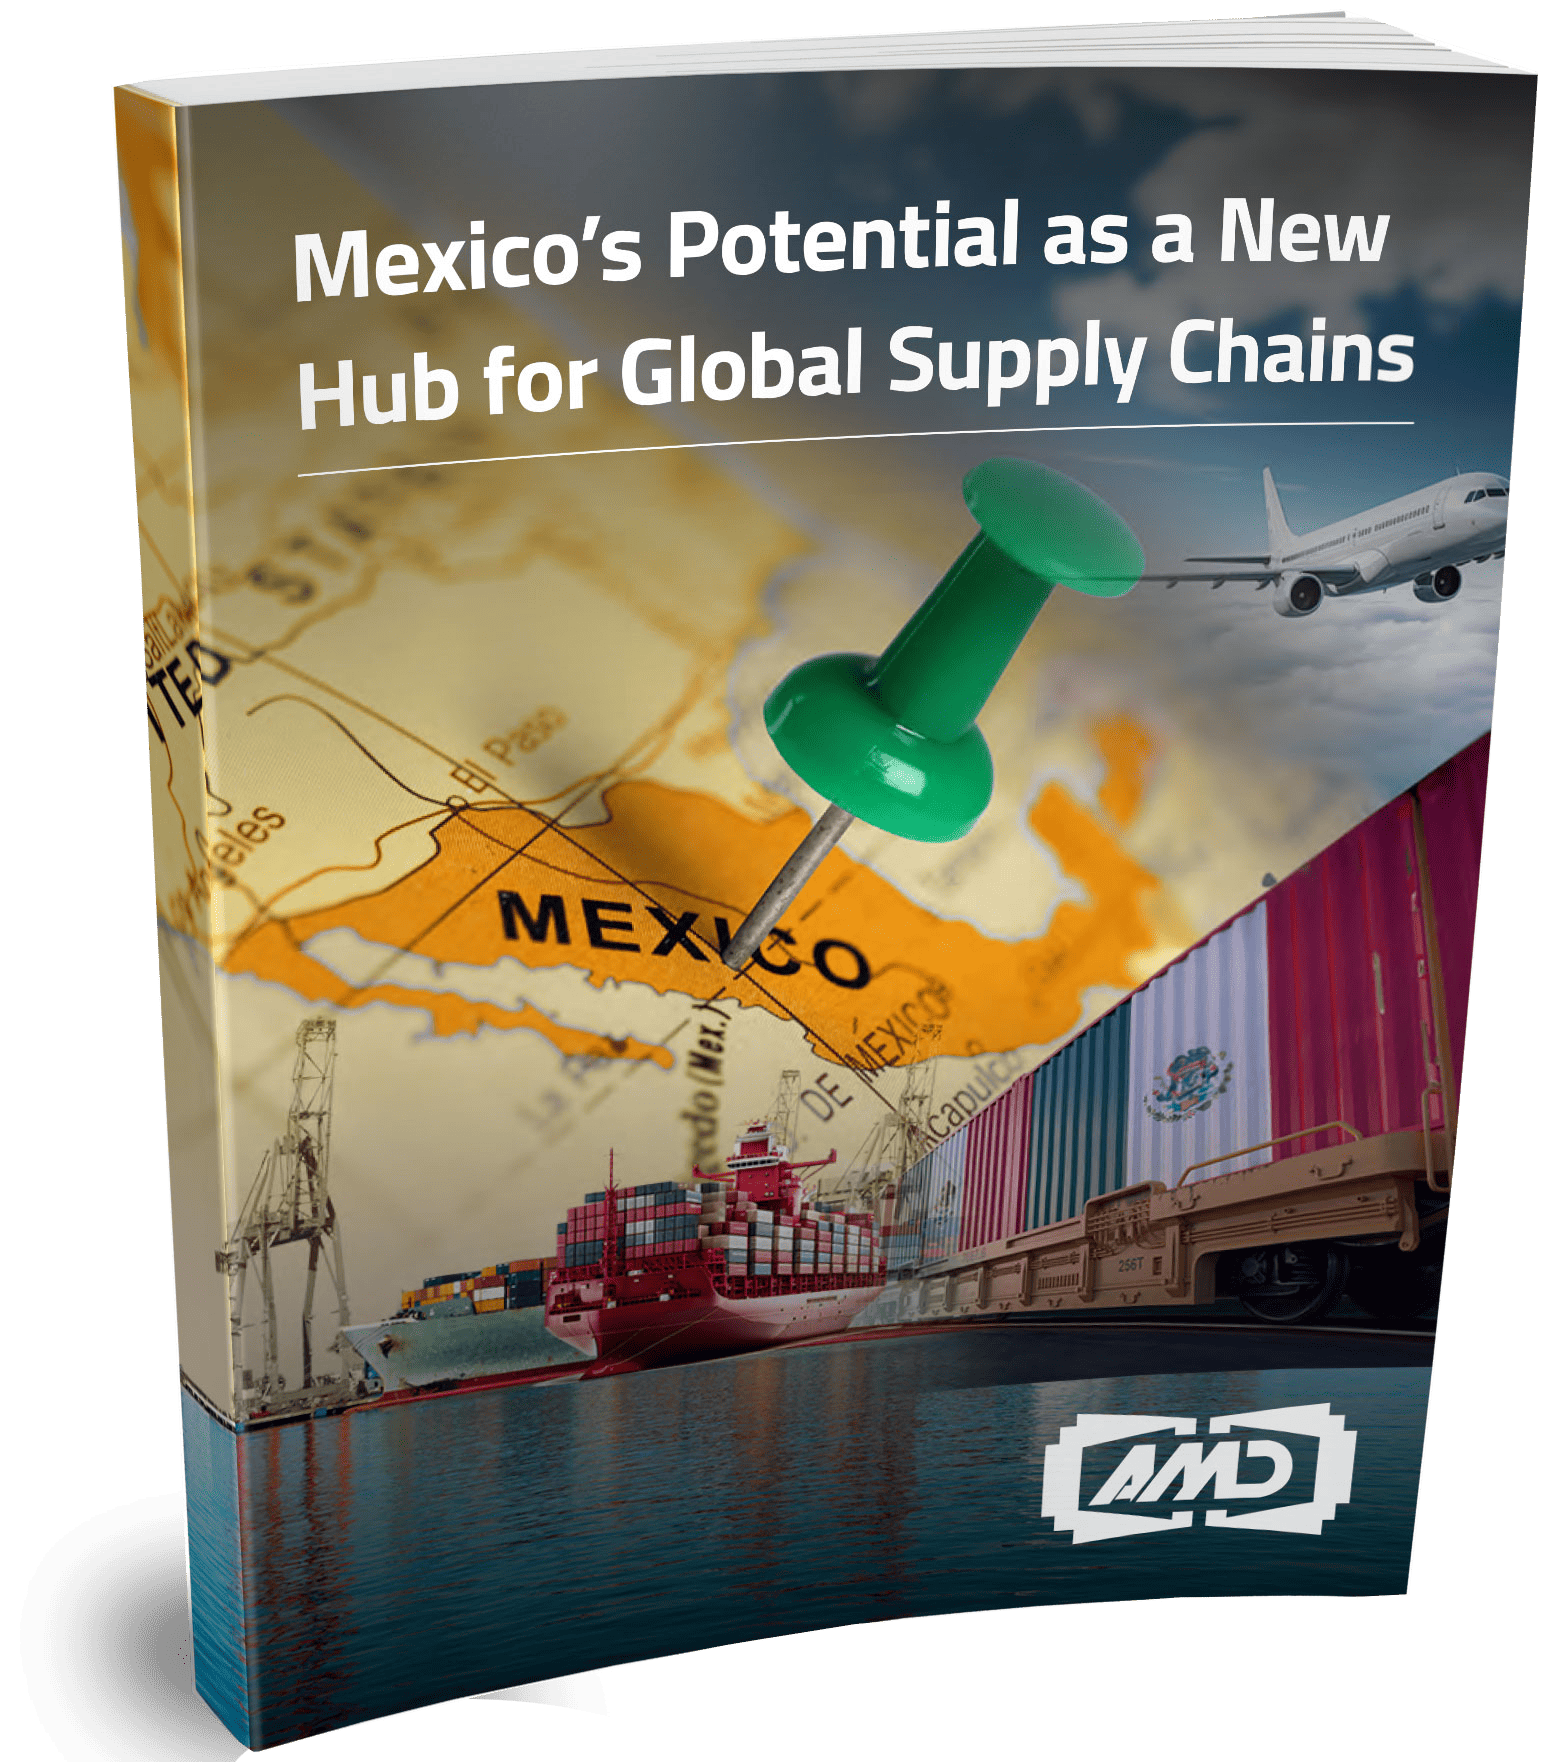 Mexico’s Potential as a New Hub for Global Supply Chains